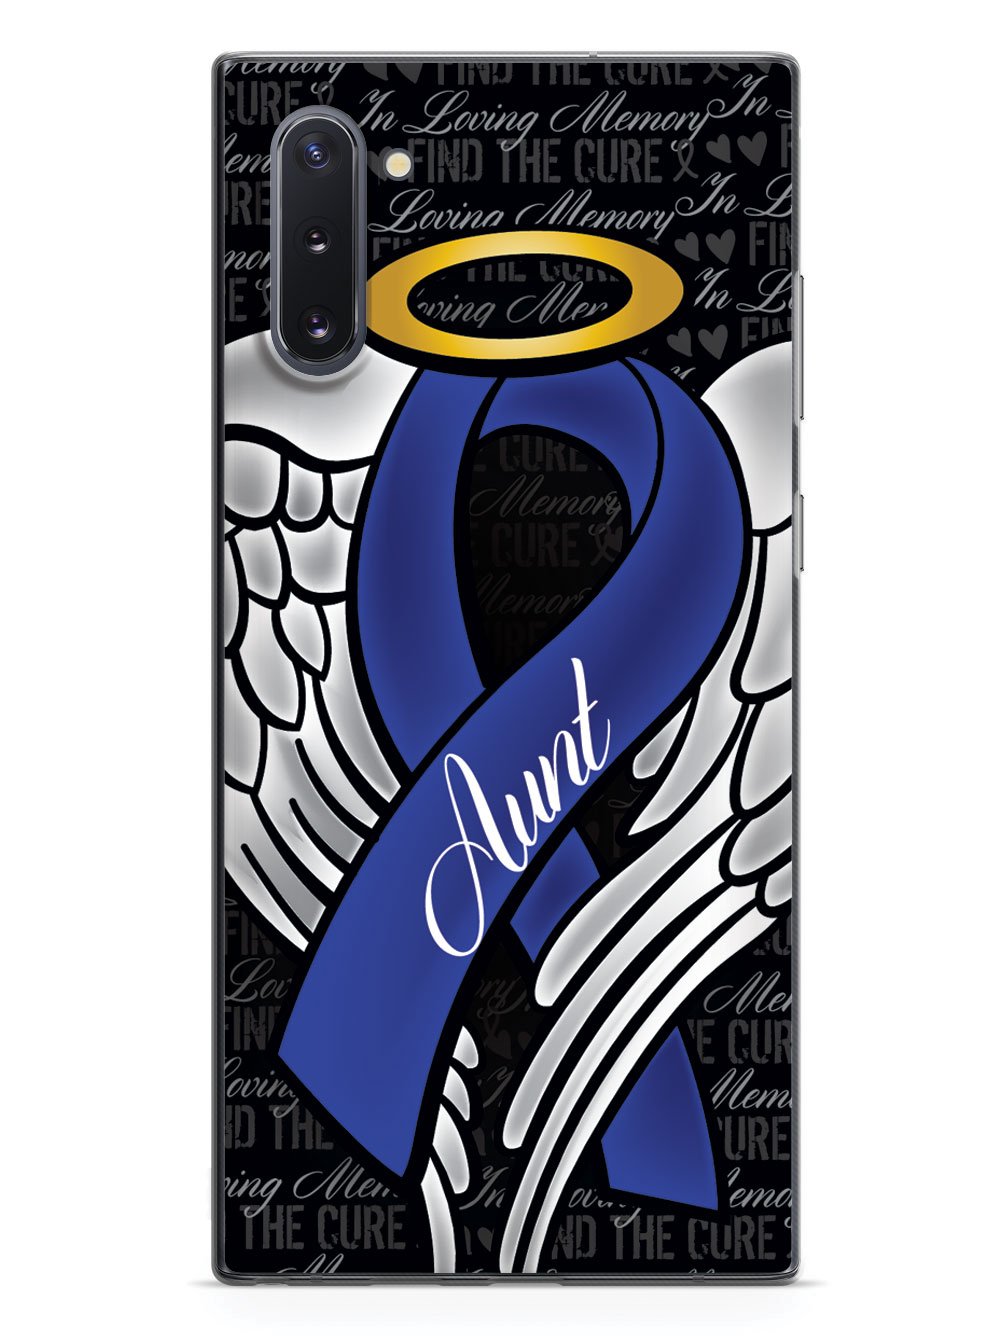 In Loving Memory of My Aunt - Blue Ribbon Case